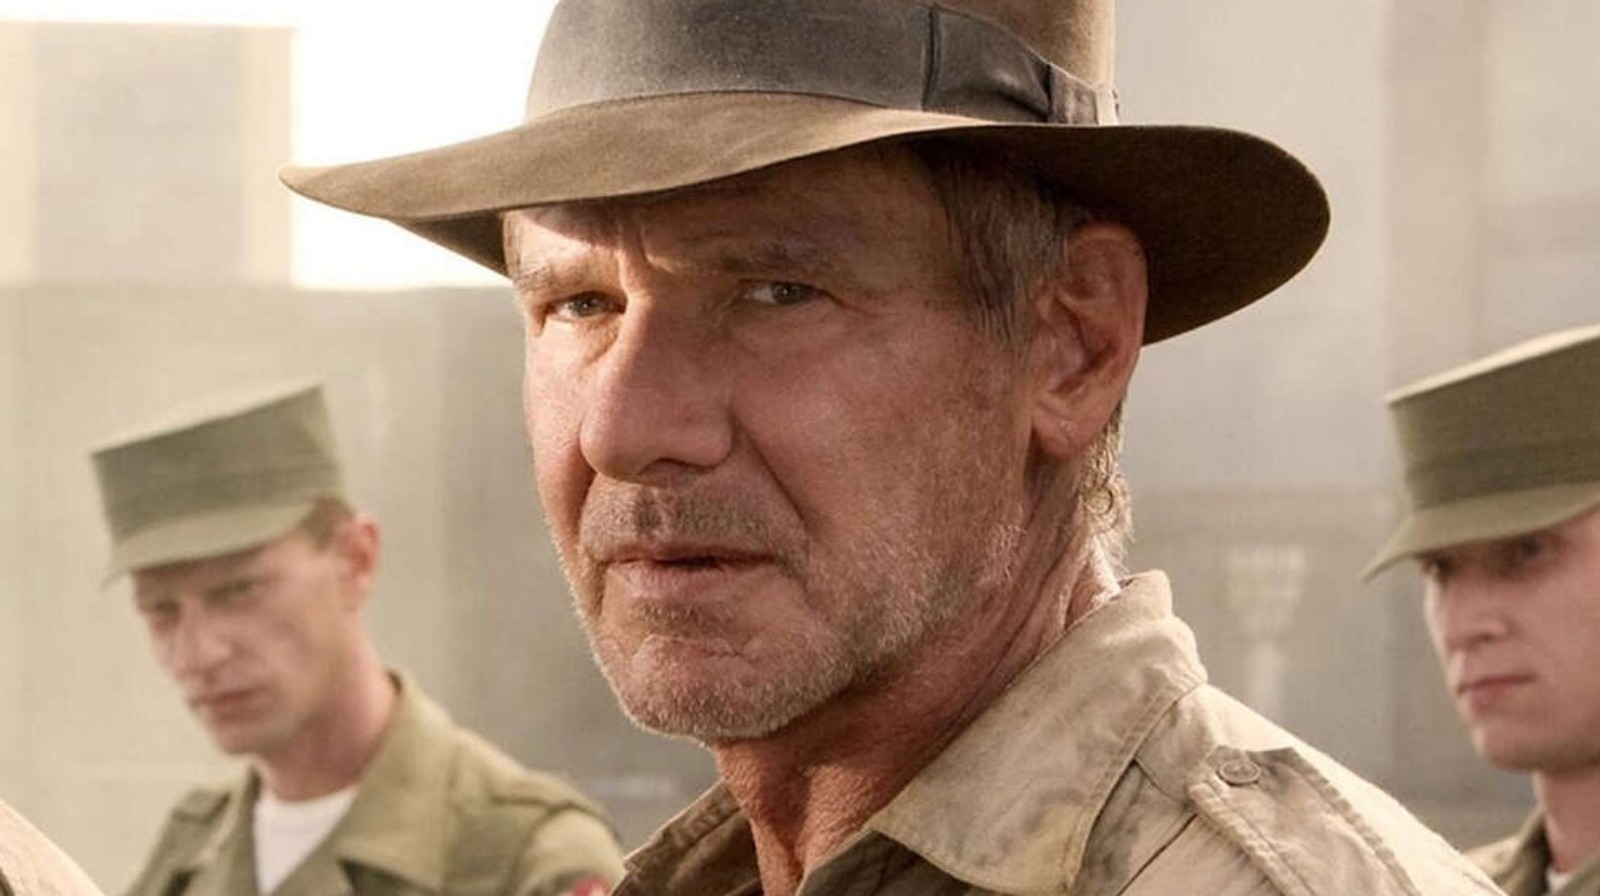 Indiana Jones and the Kingdom of the Crystal Skull - Rotten Tomatoes